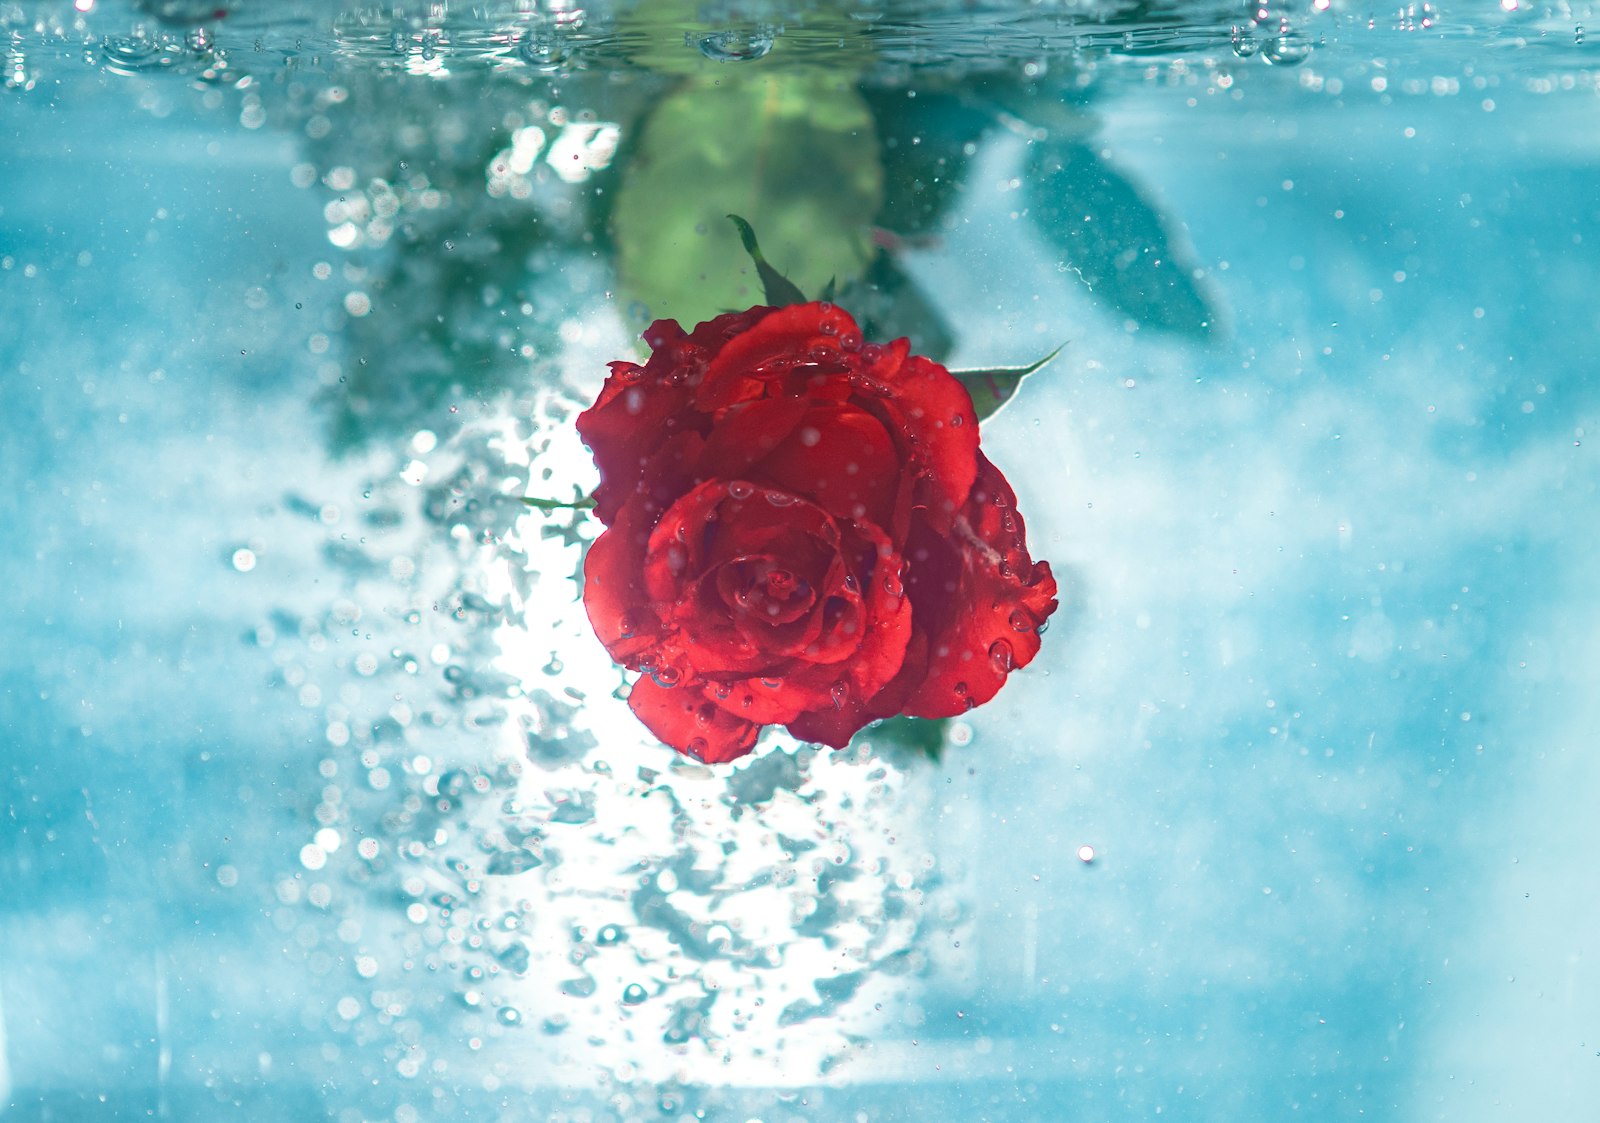 Panasonic Lumix DC-GH5 sample photo. Red flower under water photography